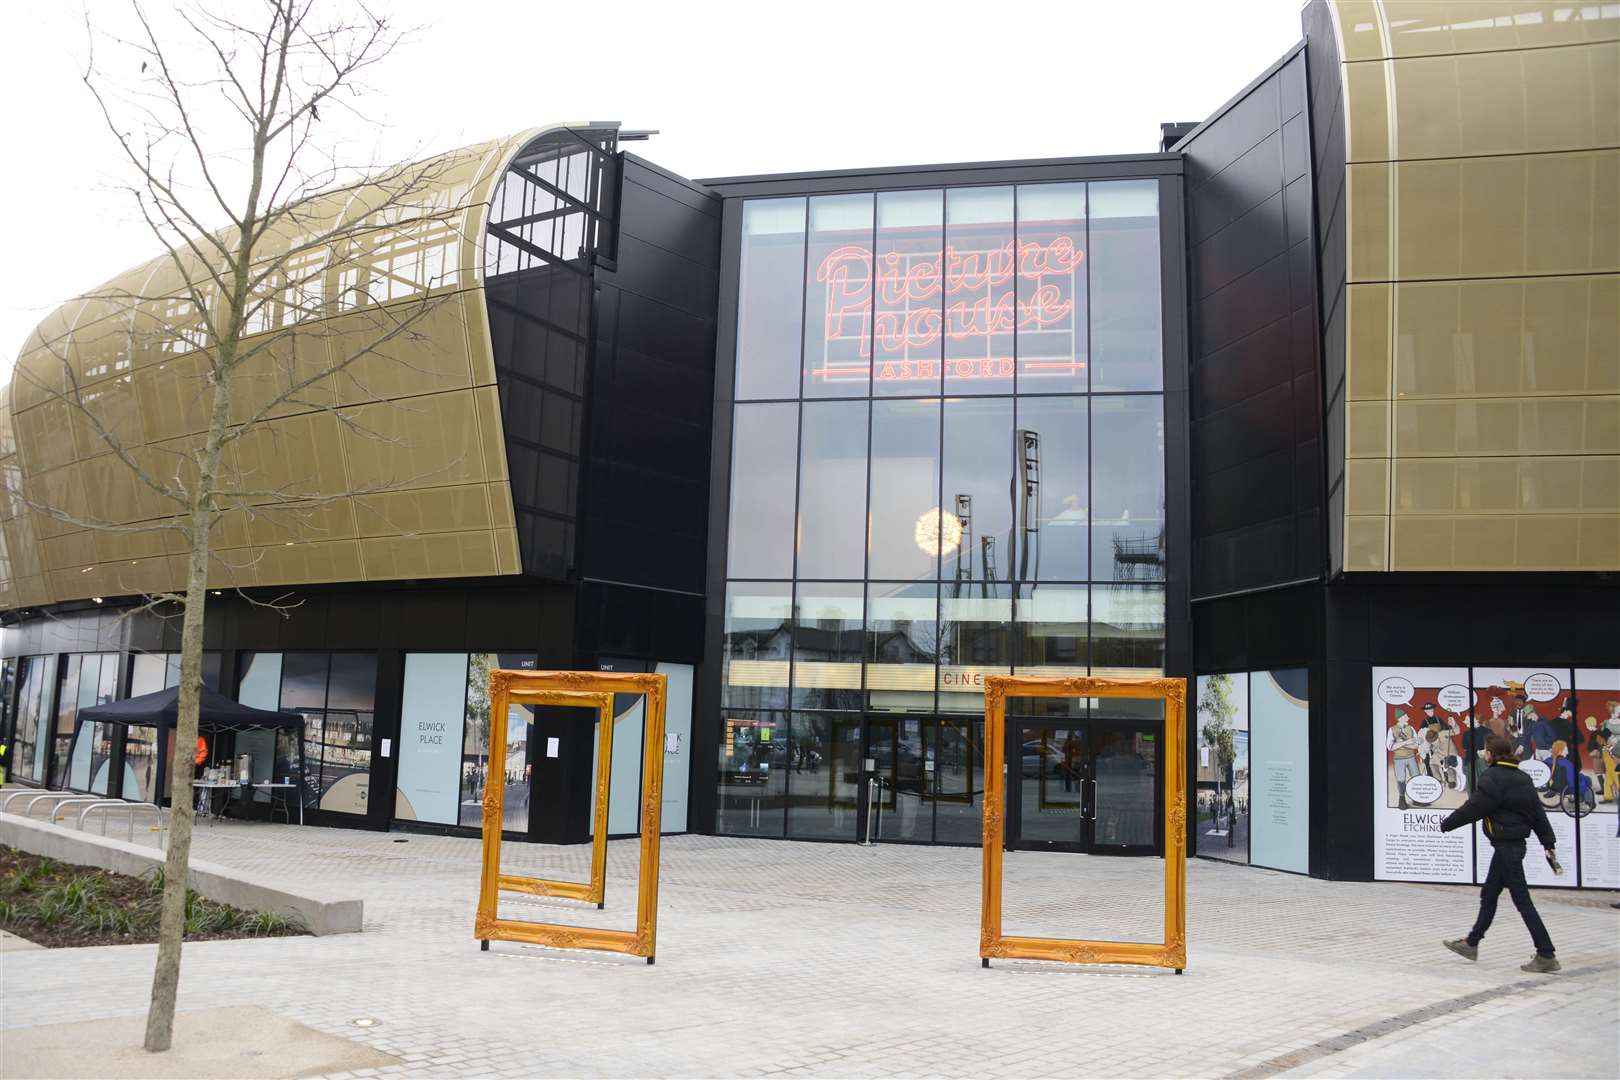 The cinema was opened in December as the first phase of the £75m Elwick Place project